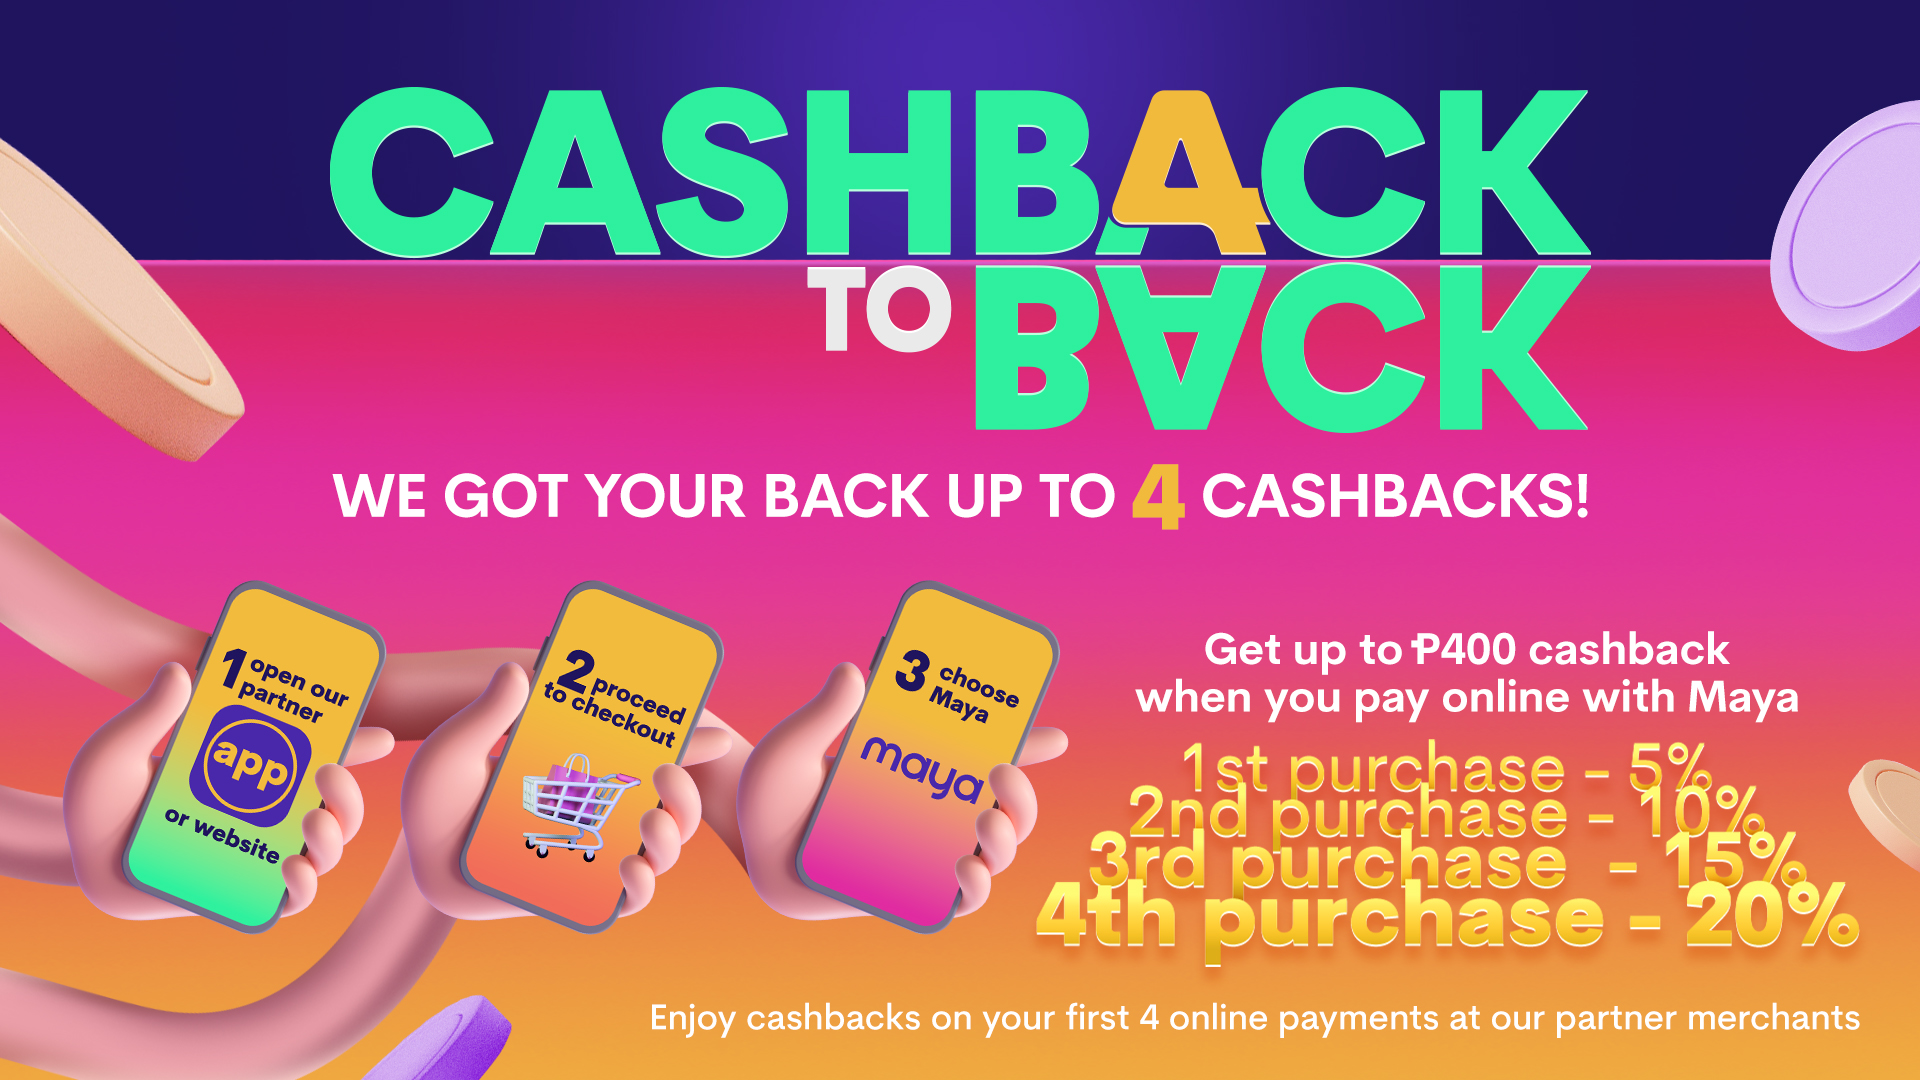 CASHB4CK TO BACK Online Payments Promo